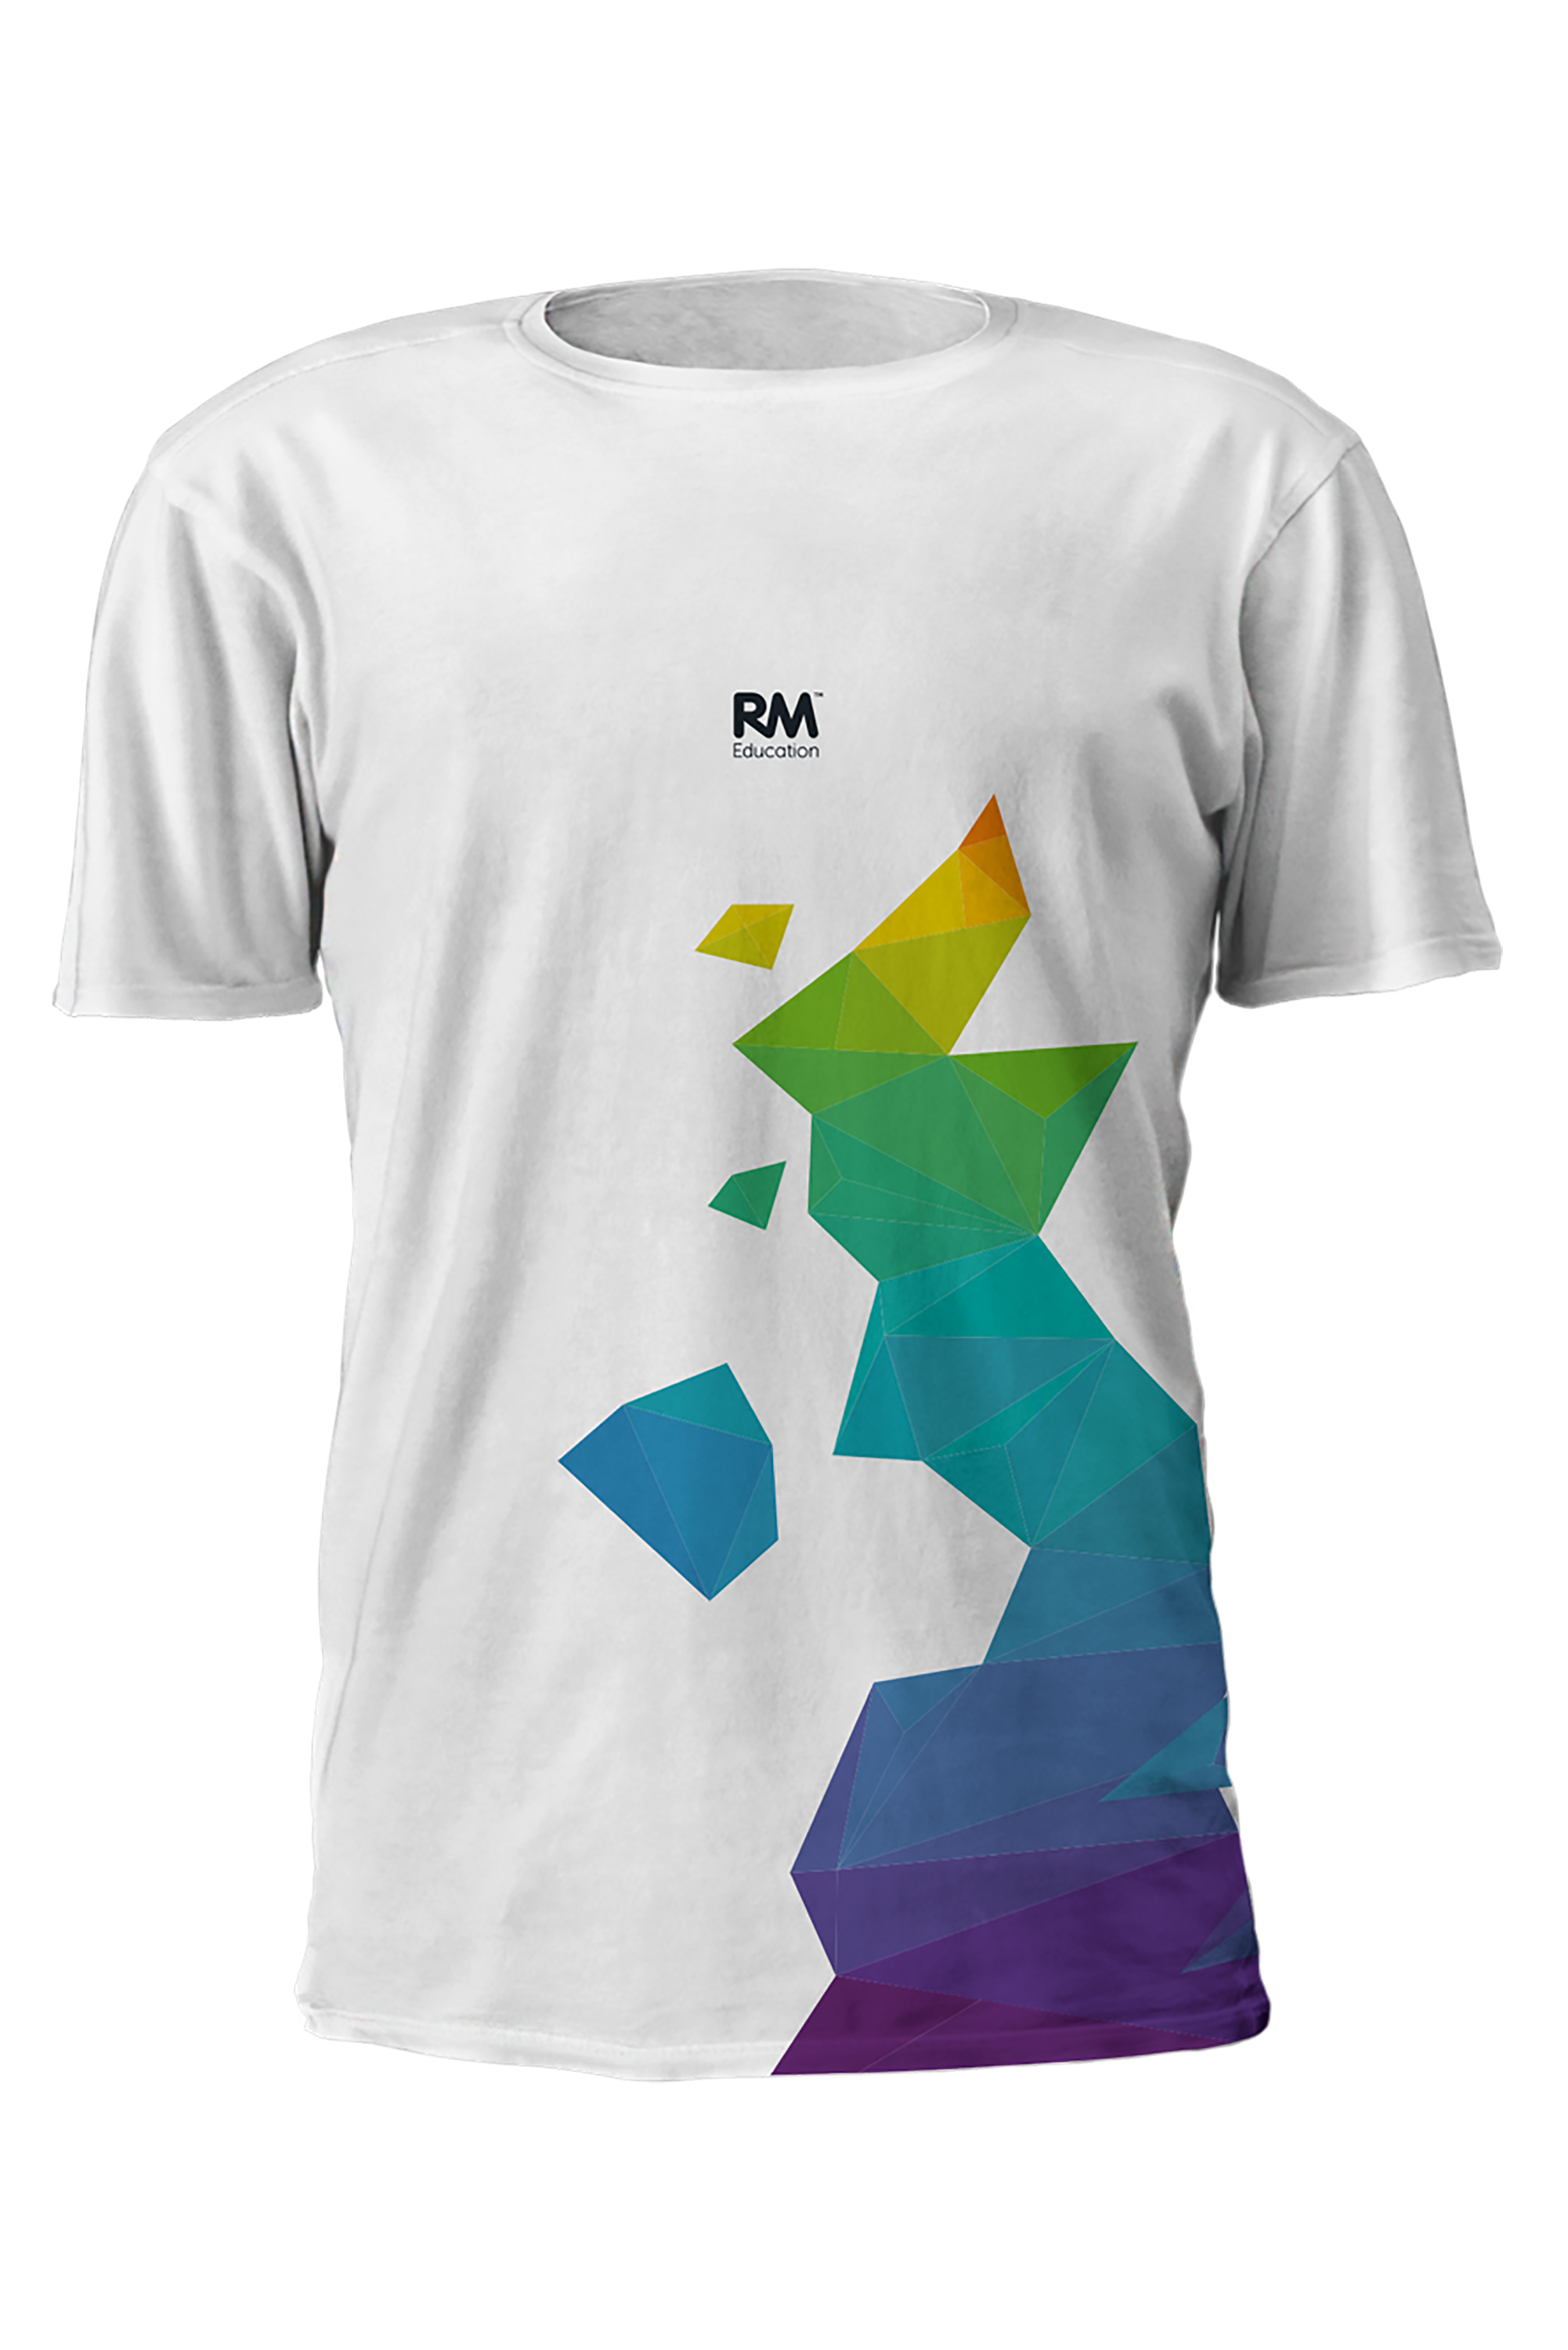 white tshirt front view with colourful graphic of map of UK and RM Education logo